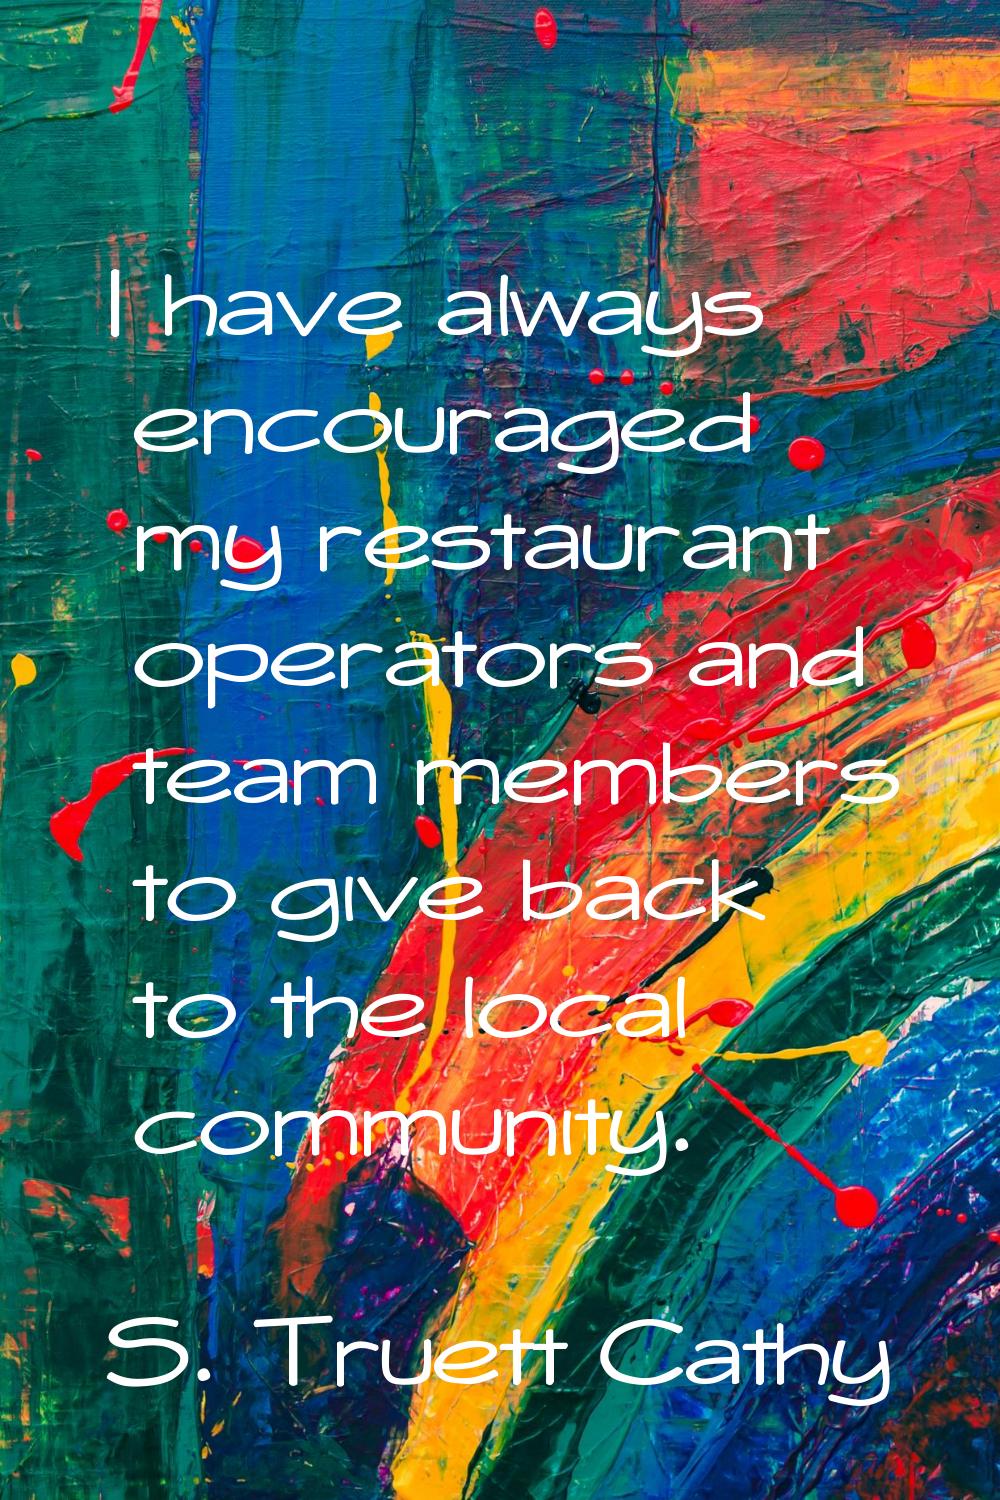 I have always encouraged my restaurant operators and team members to give back to the local communi